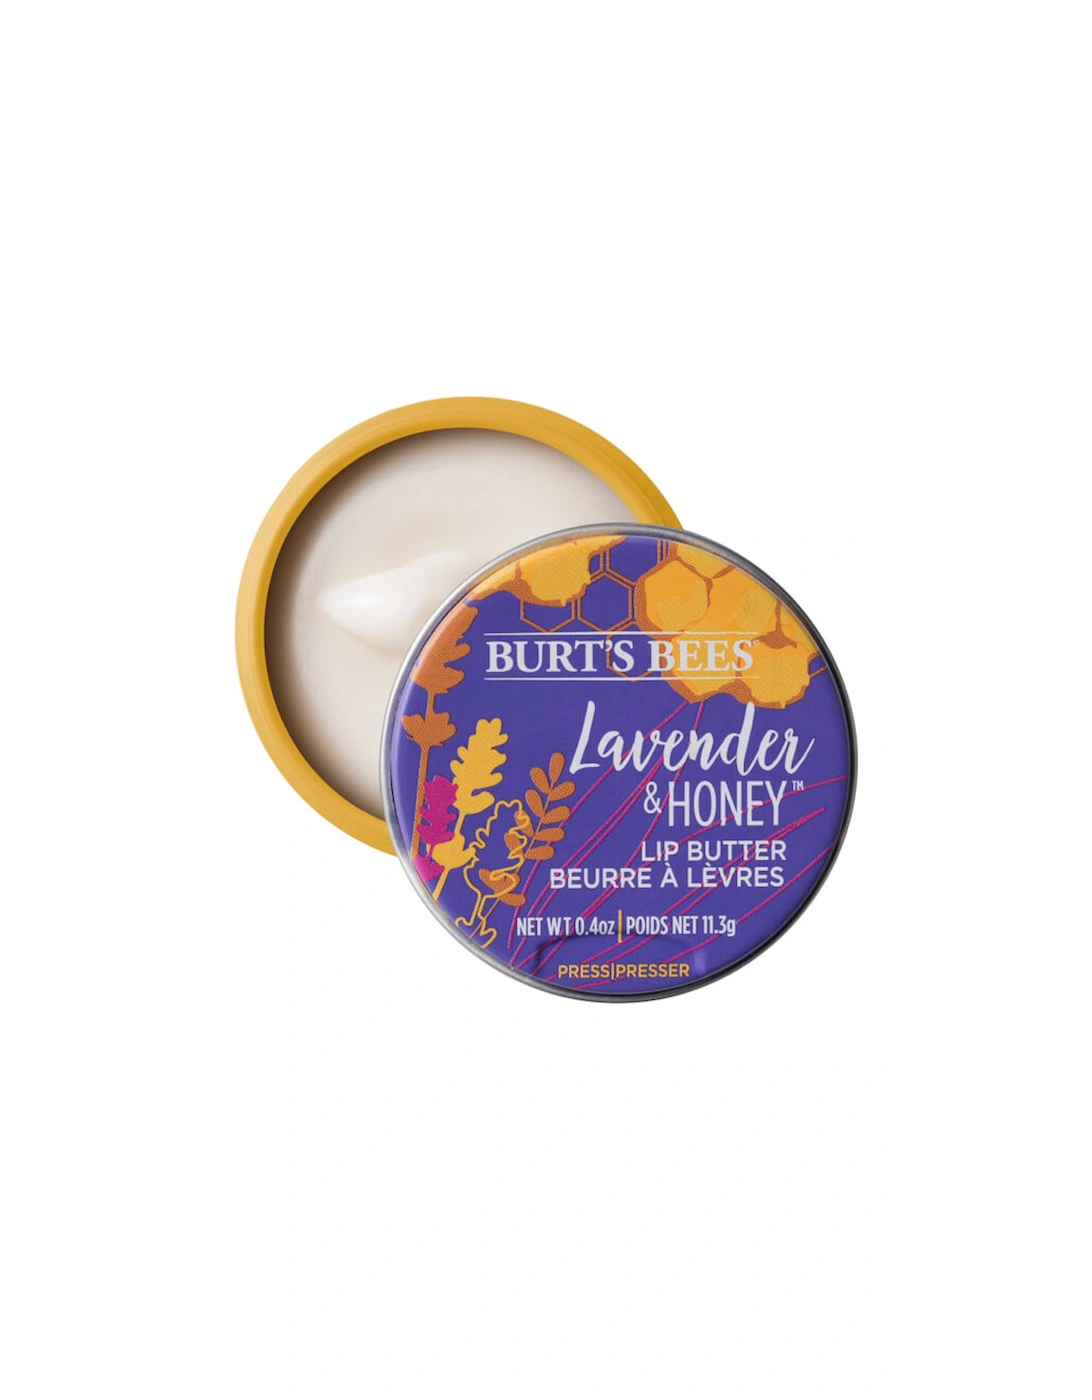 100% Natural Moisturizing Lip Butter with Lavender and Honey 11.3g - - 100% Natural Moisturizing Lip Butter with Lavender and Honey 11.3g - ena.nlndt, 2 of 1